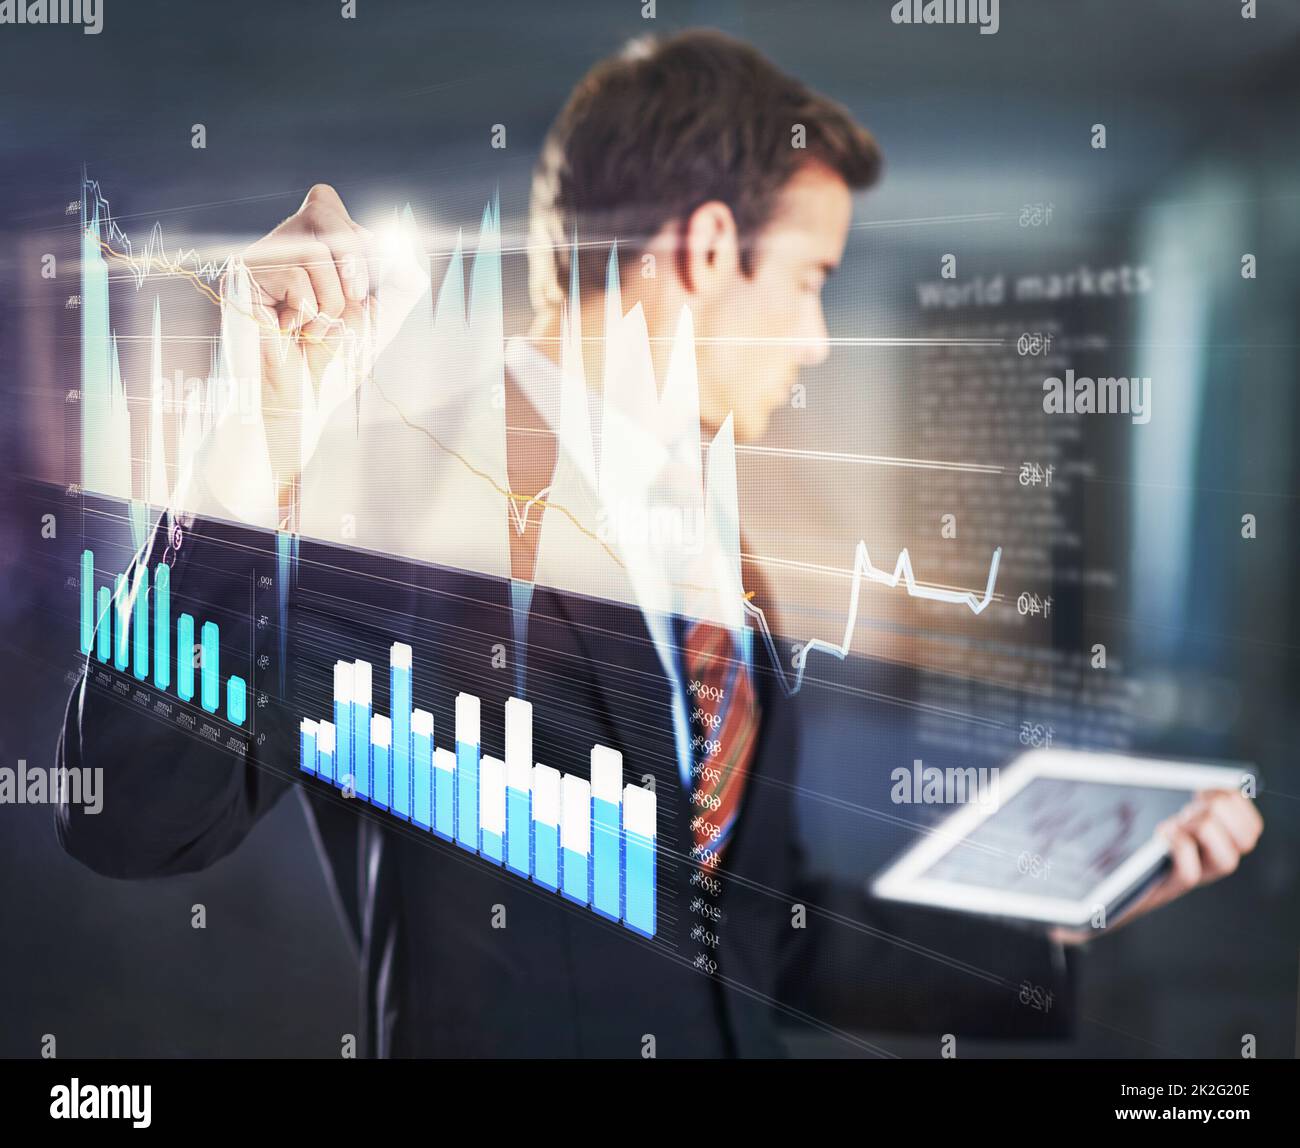 The future of corporate business. Cropped shot of a handsome young businessman using a digital interface to plot graphs. Stock Photo